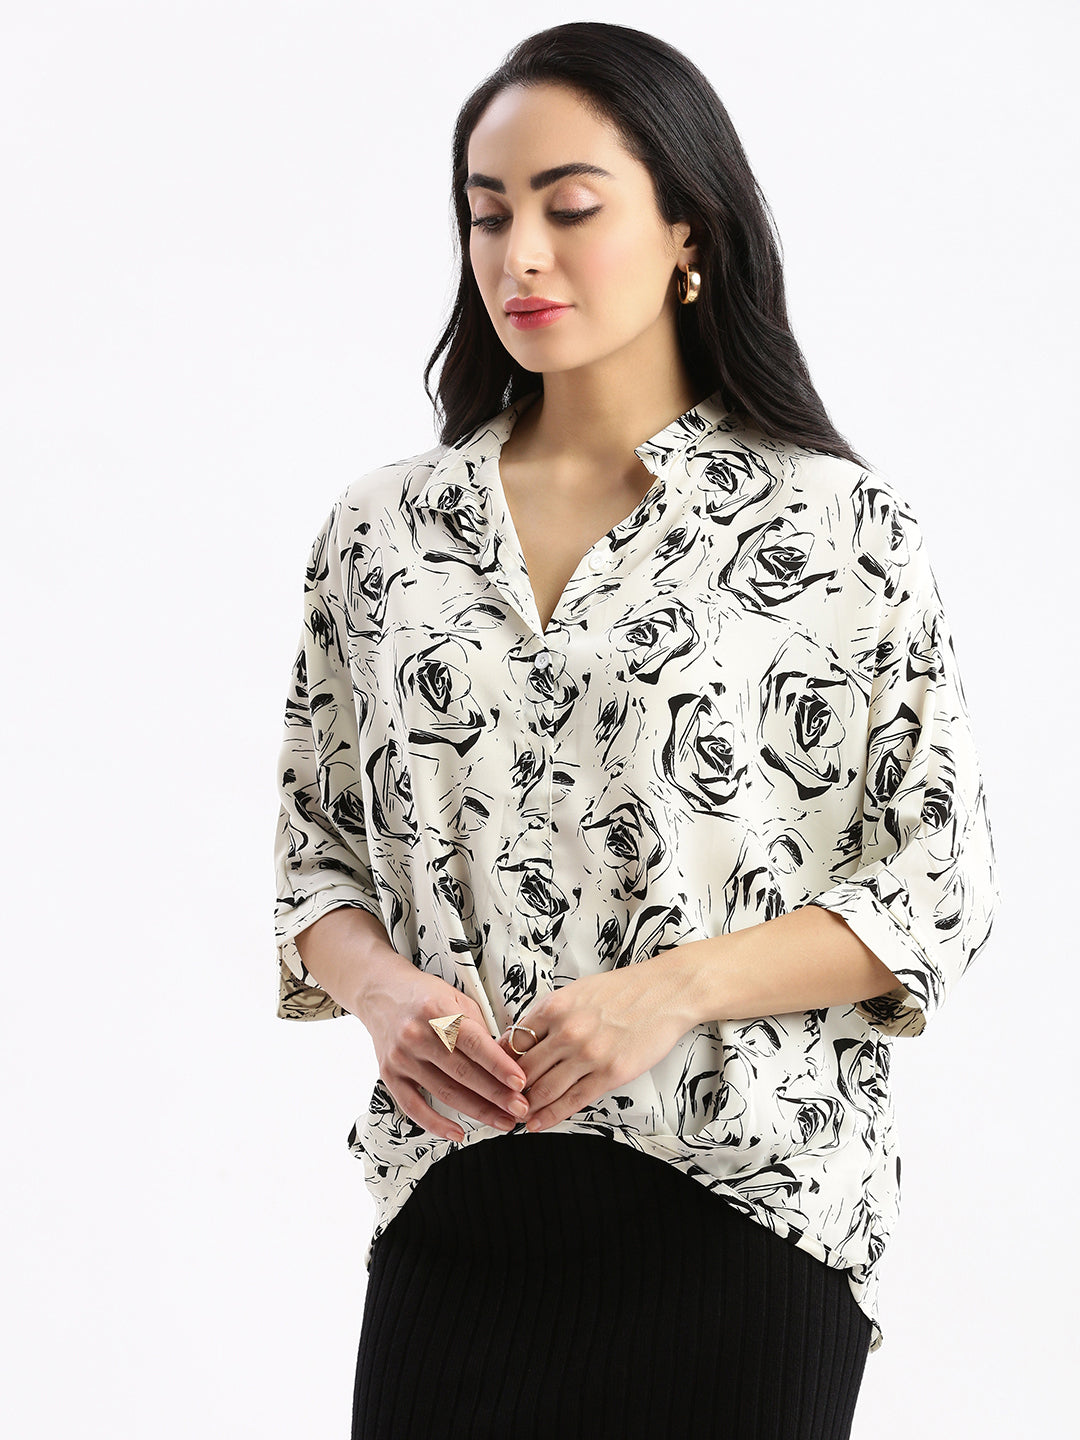 Women Floral Cream Shirt Style Oversized Top